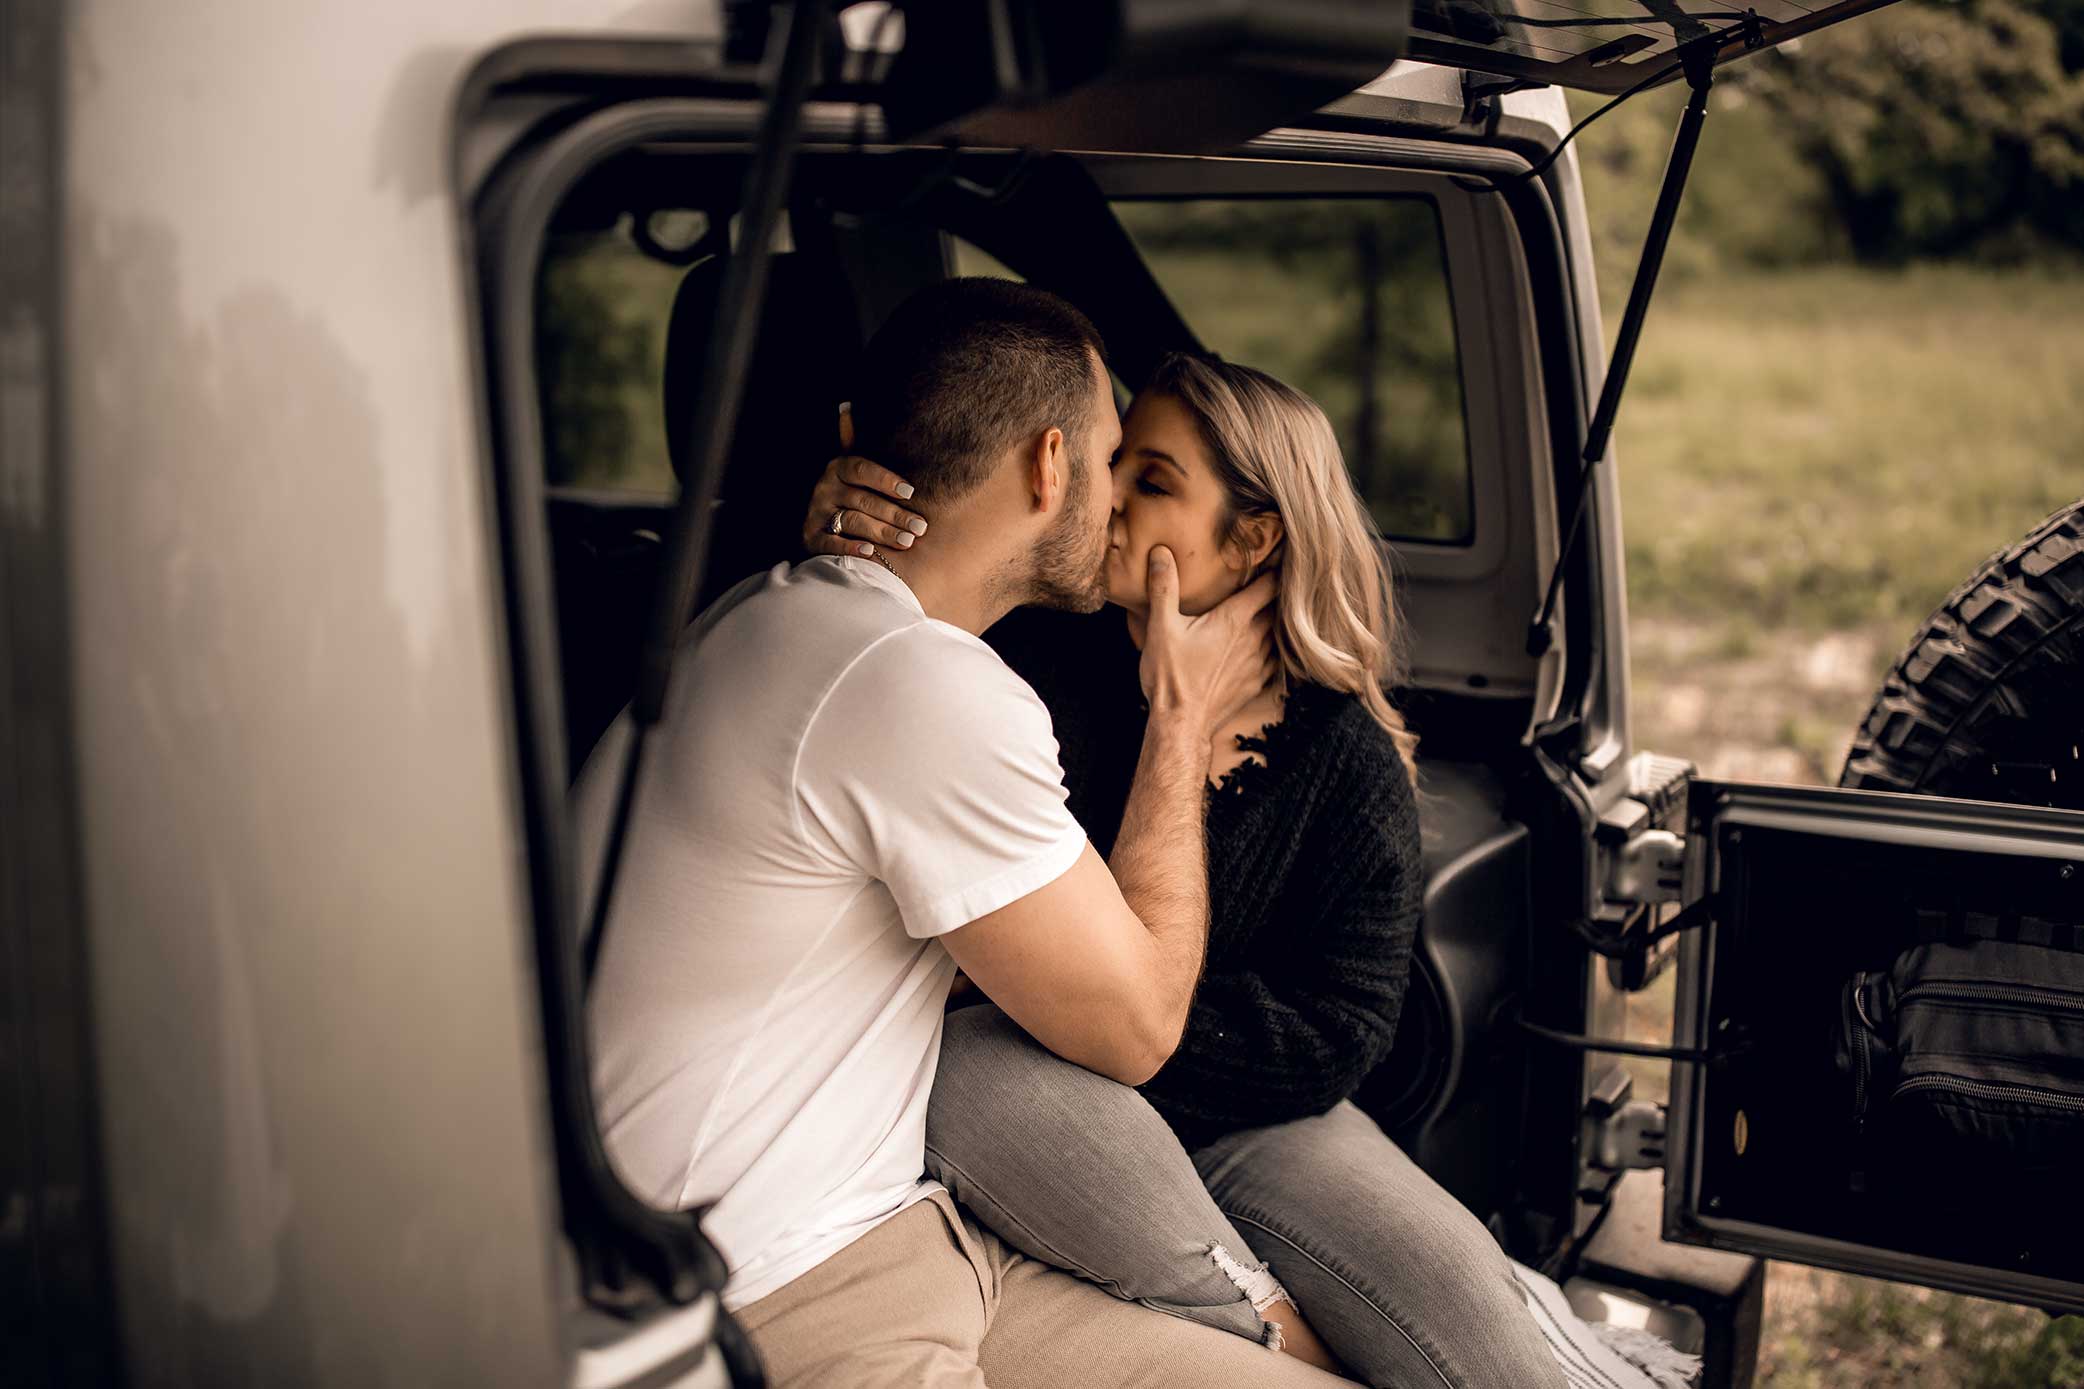 shelby-schiller-photography-lifestyle-couples-remi-colt-outdoor-jeep-adventure-3.jpg